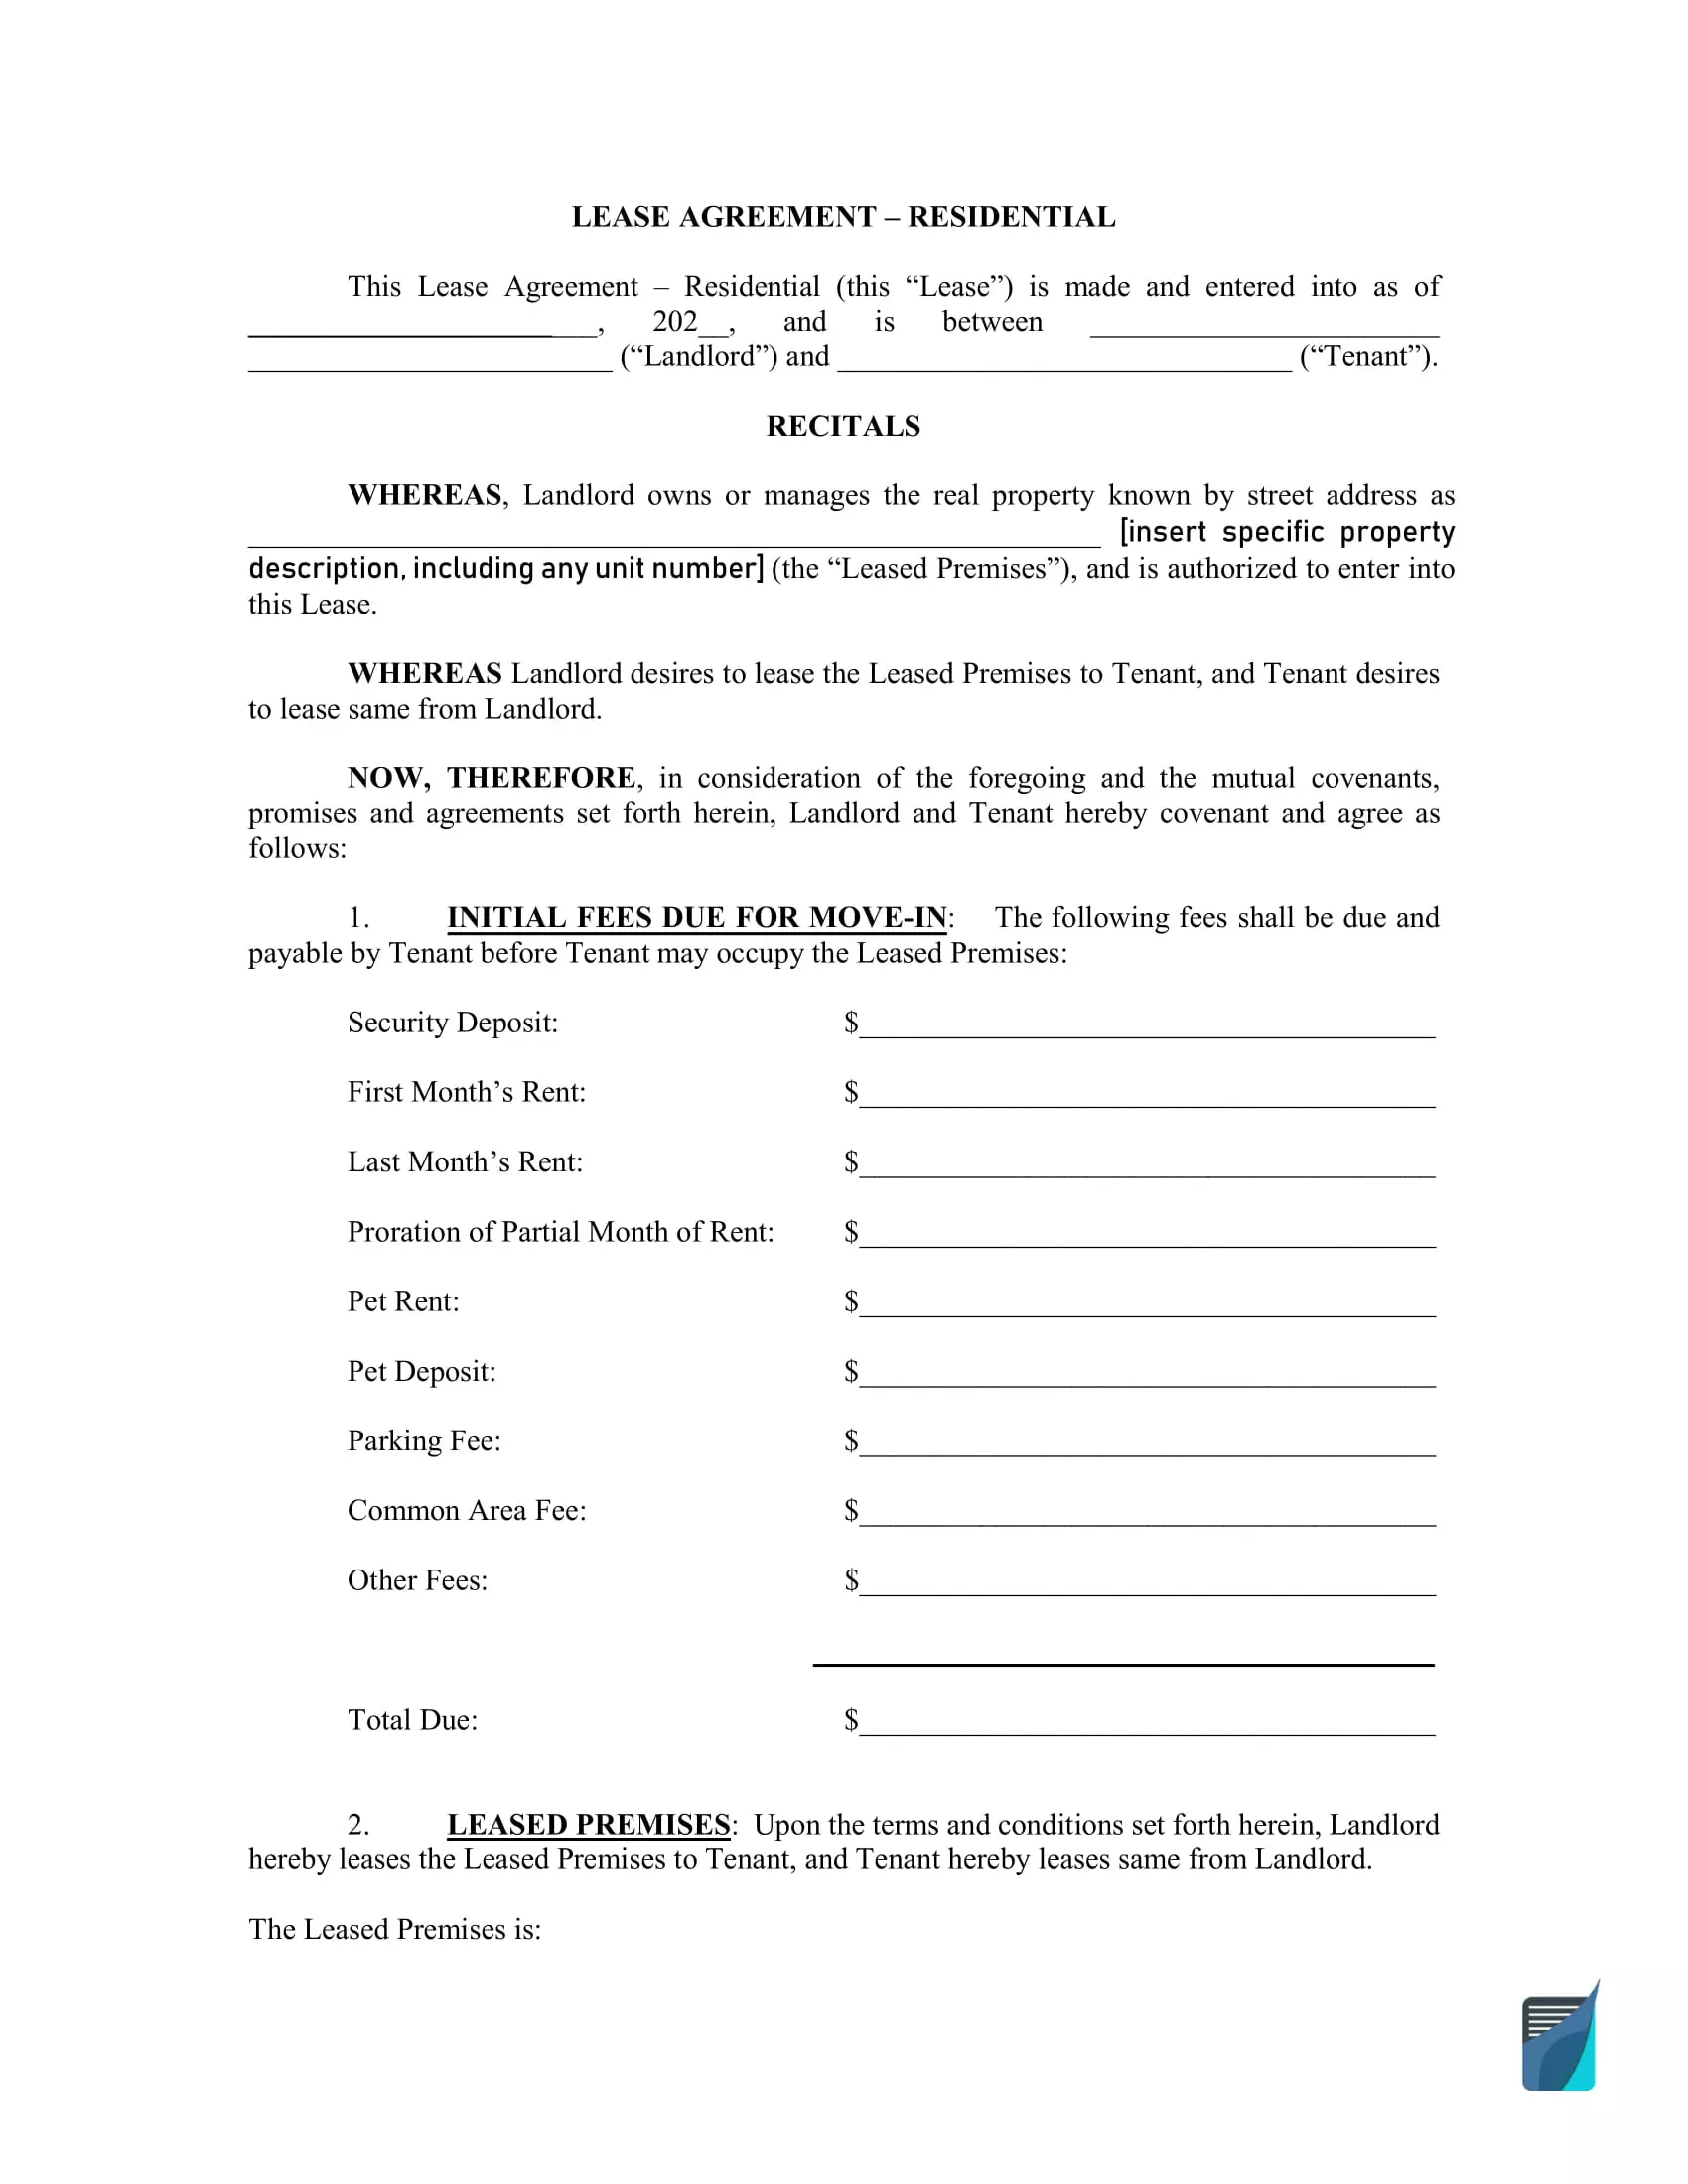 Rental Agreement Forms and Lease Templates  FormsPal Within corporate housing lease agreement template